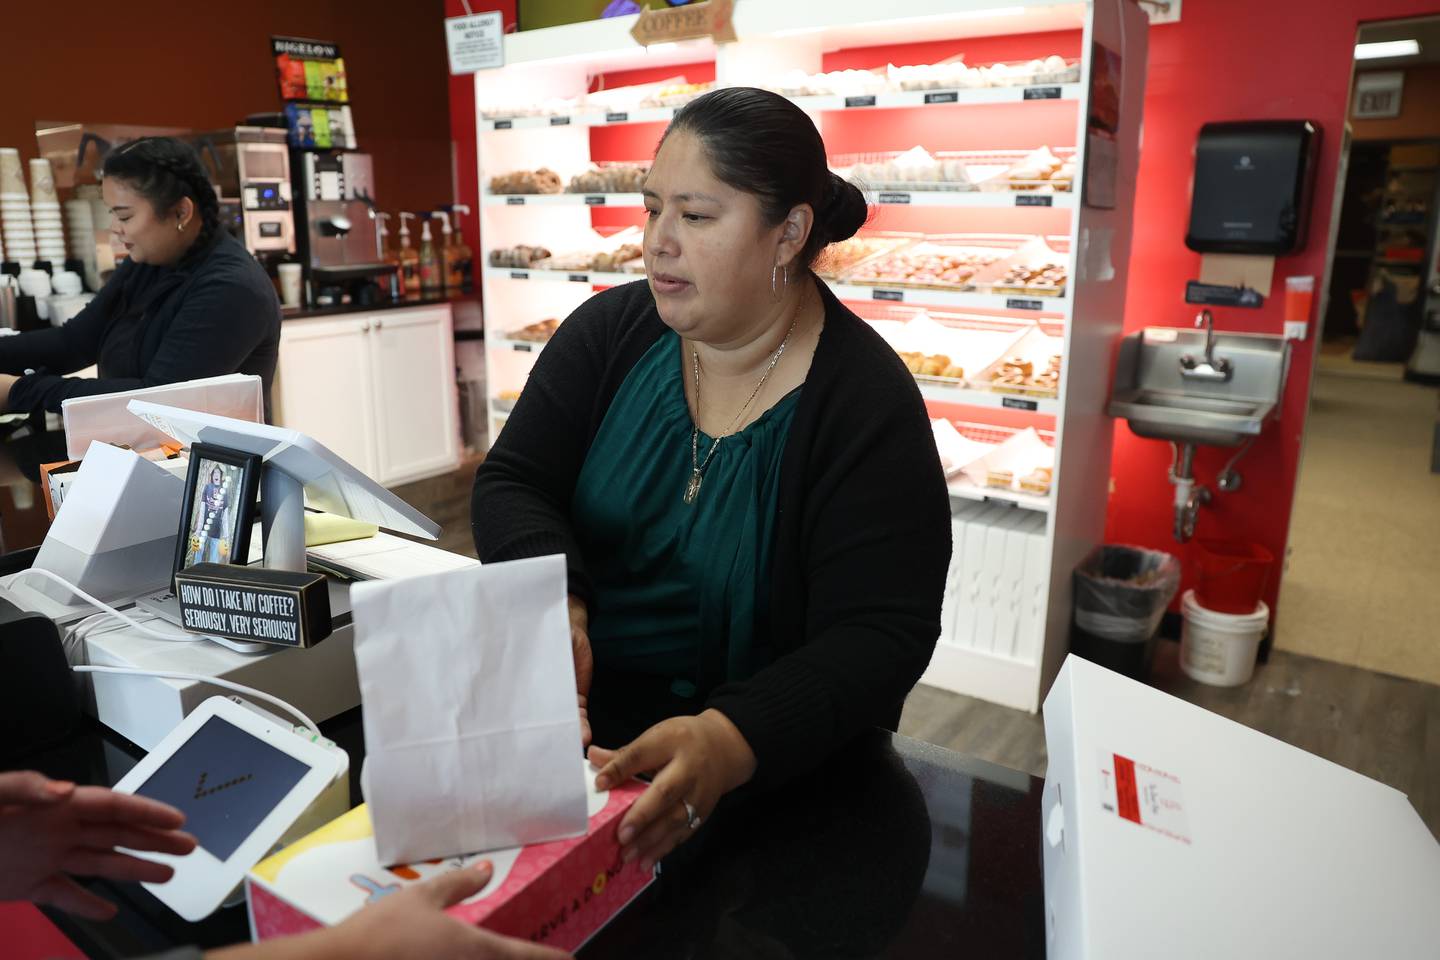 Edith Medina, owner of The Donut Shop, rings up a costumer on Wednesday, Sept. 13, in Lockport.